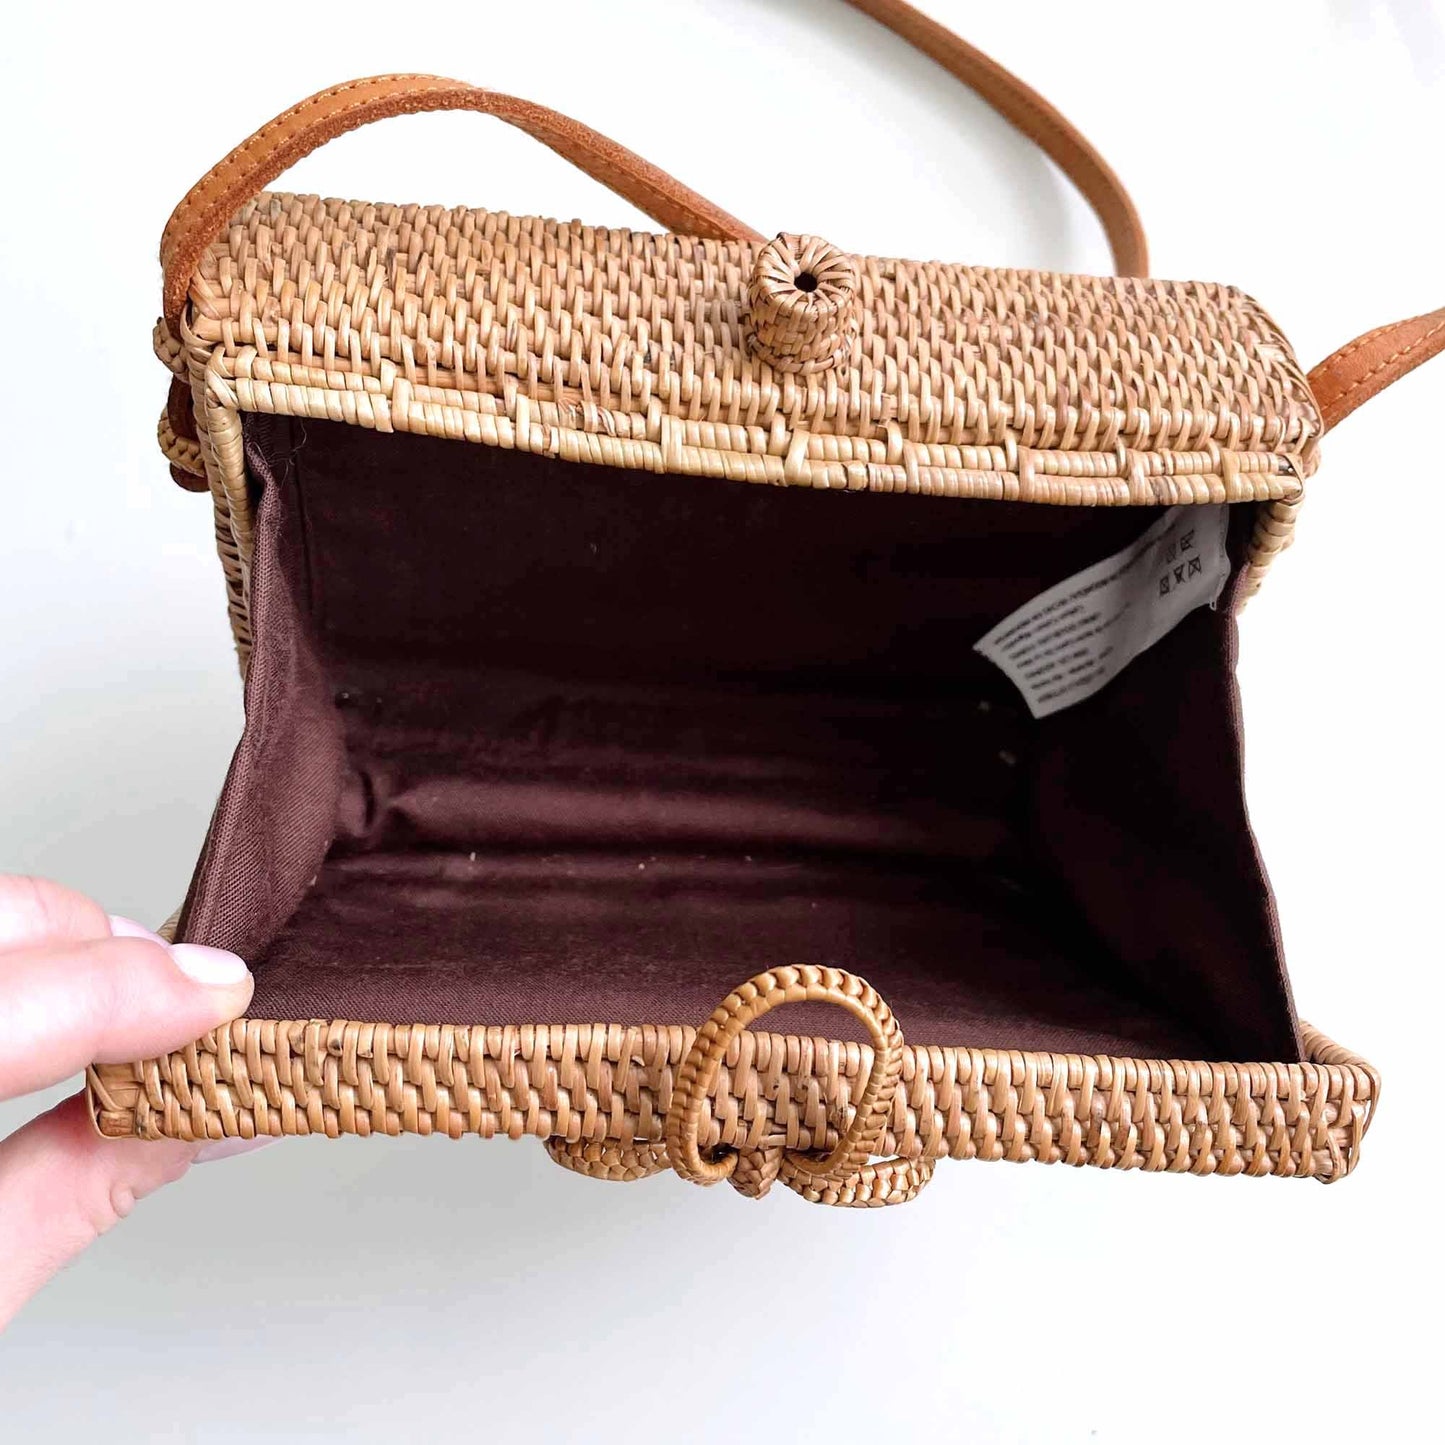 woven basket rattan crossbody bag with leather strap